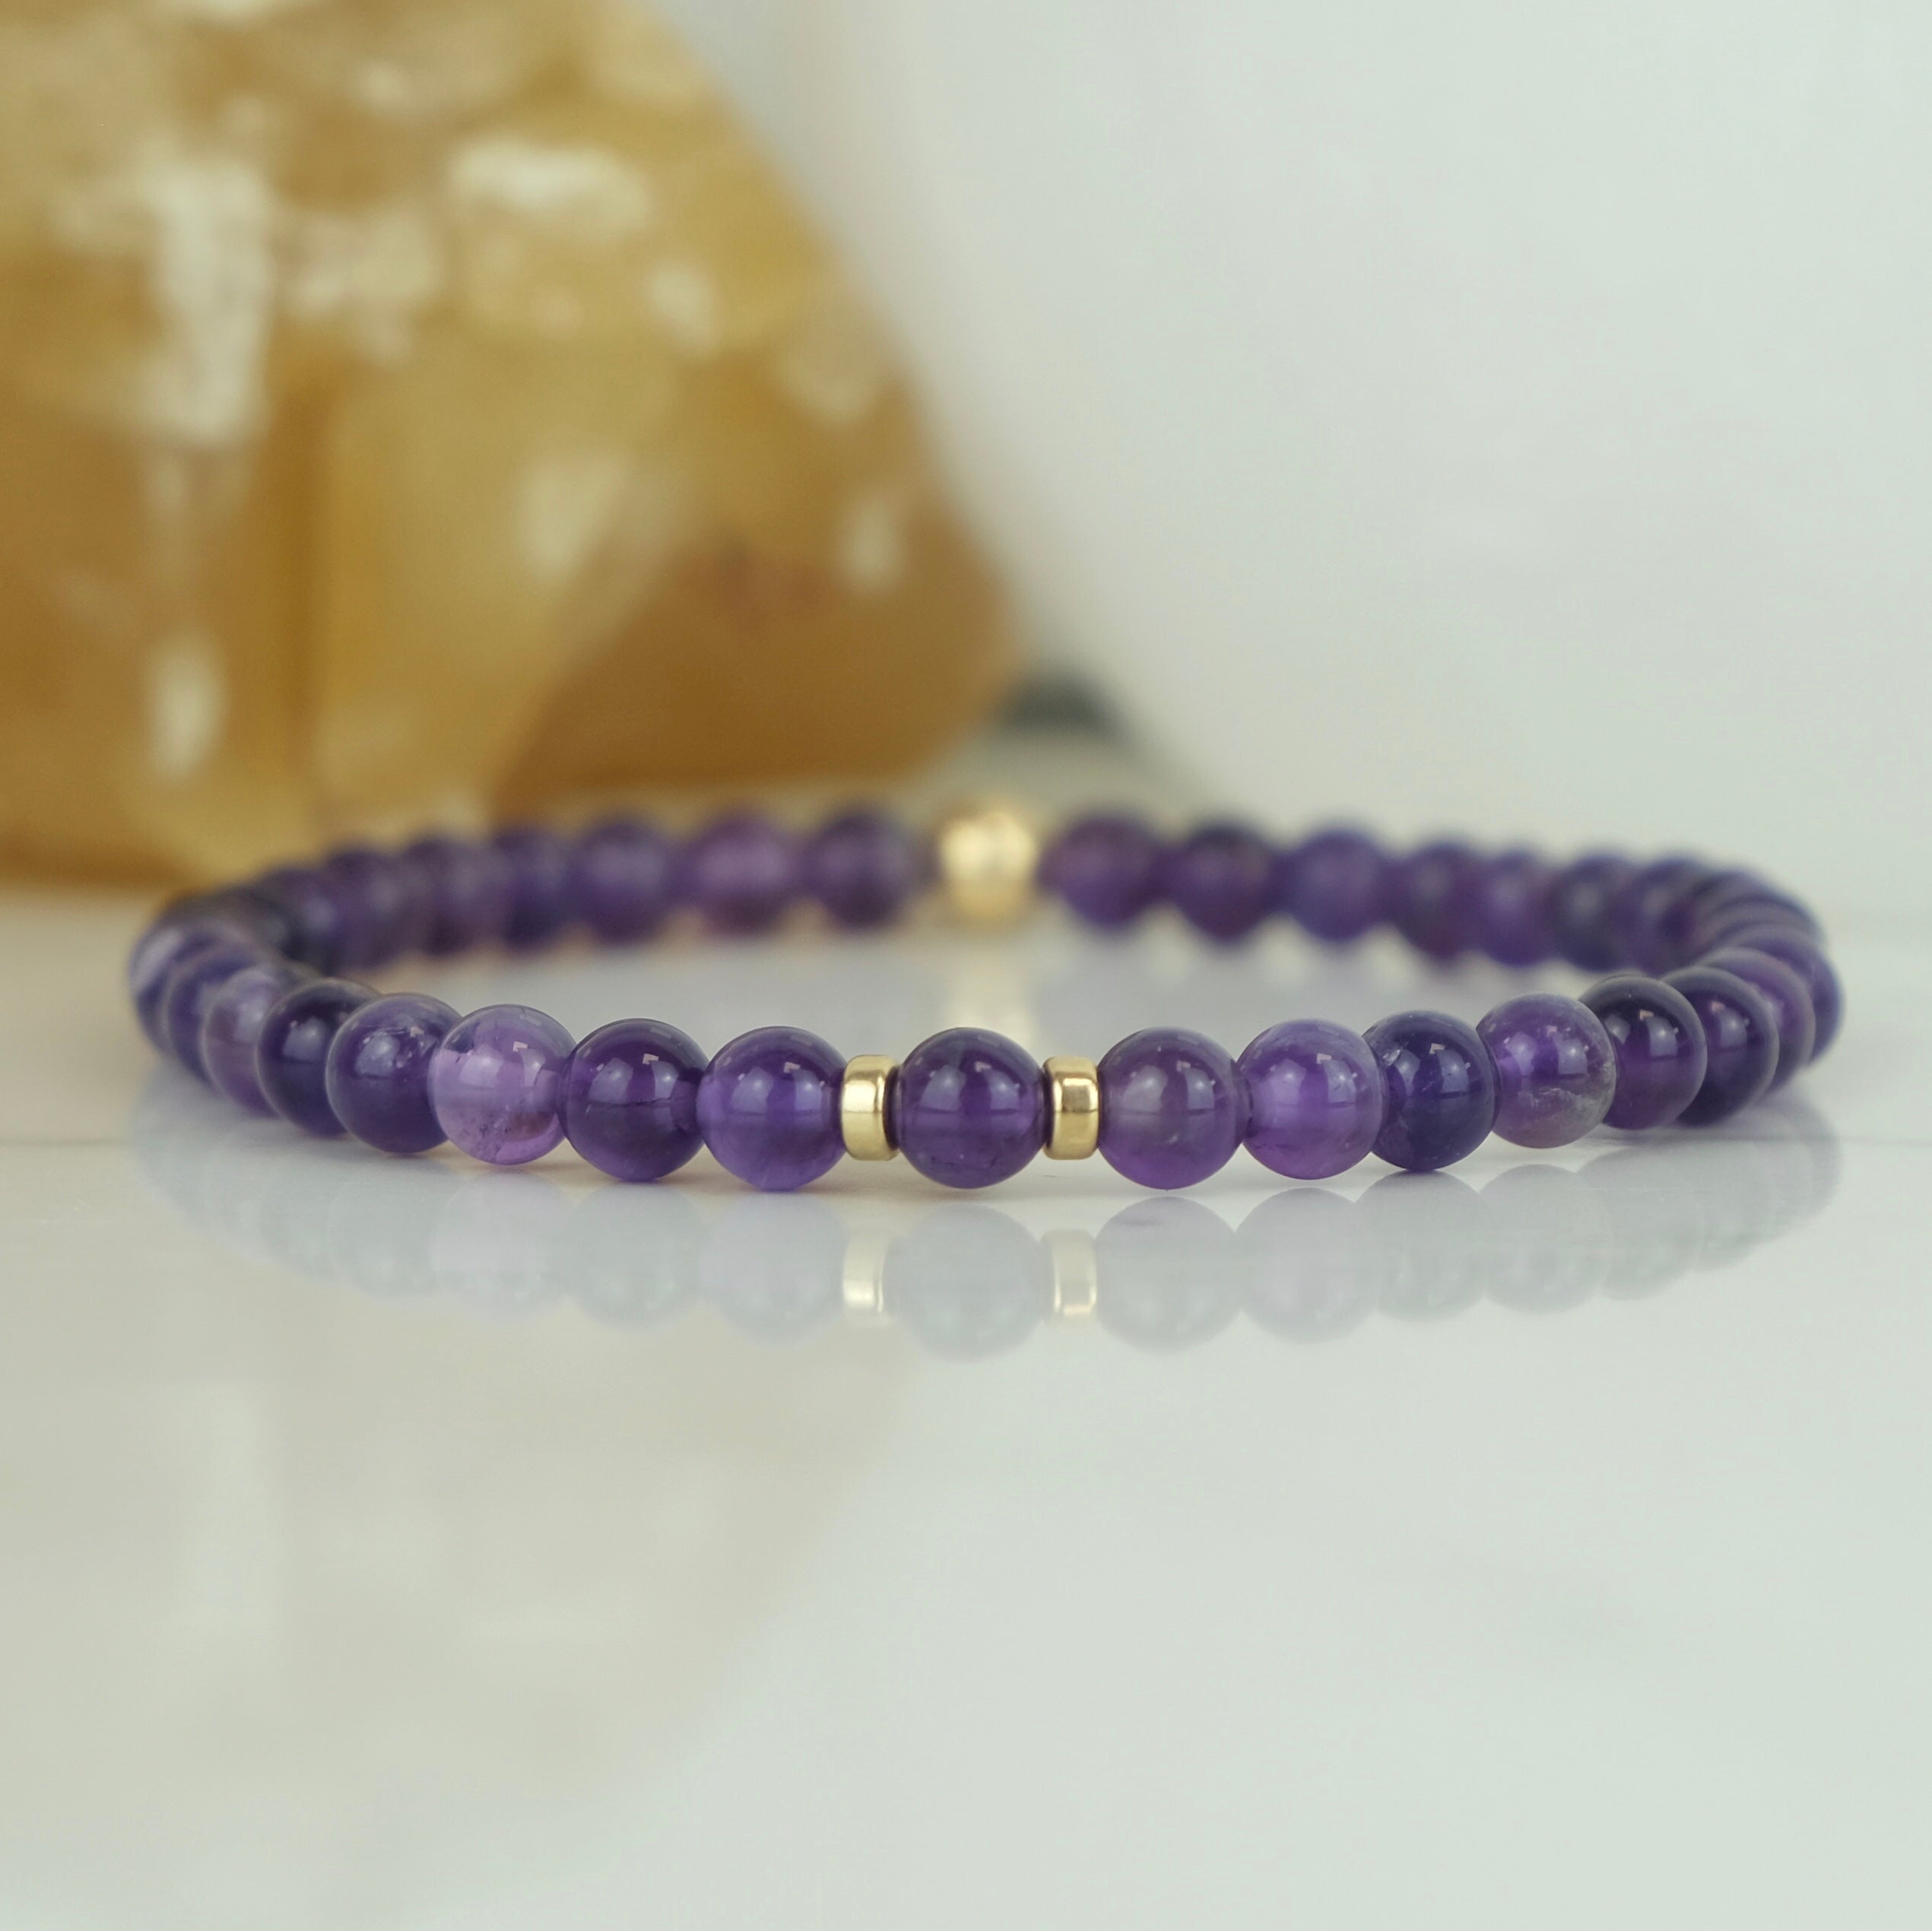 Amethyst gemstone bracelet in 4mm beads with gold filled accessories